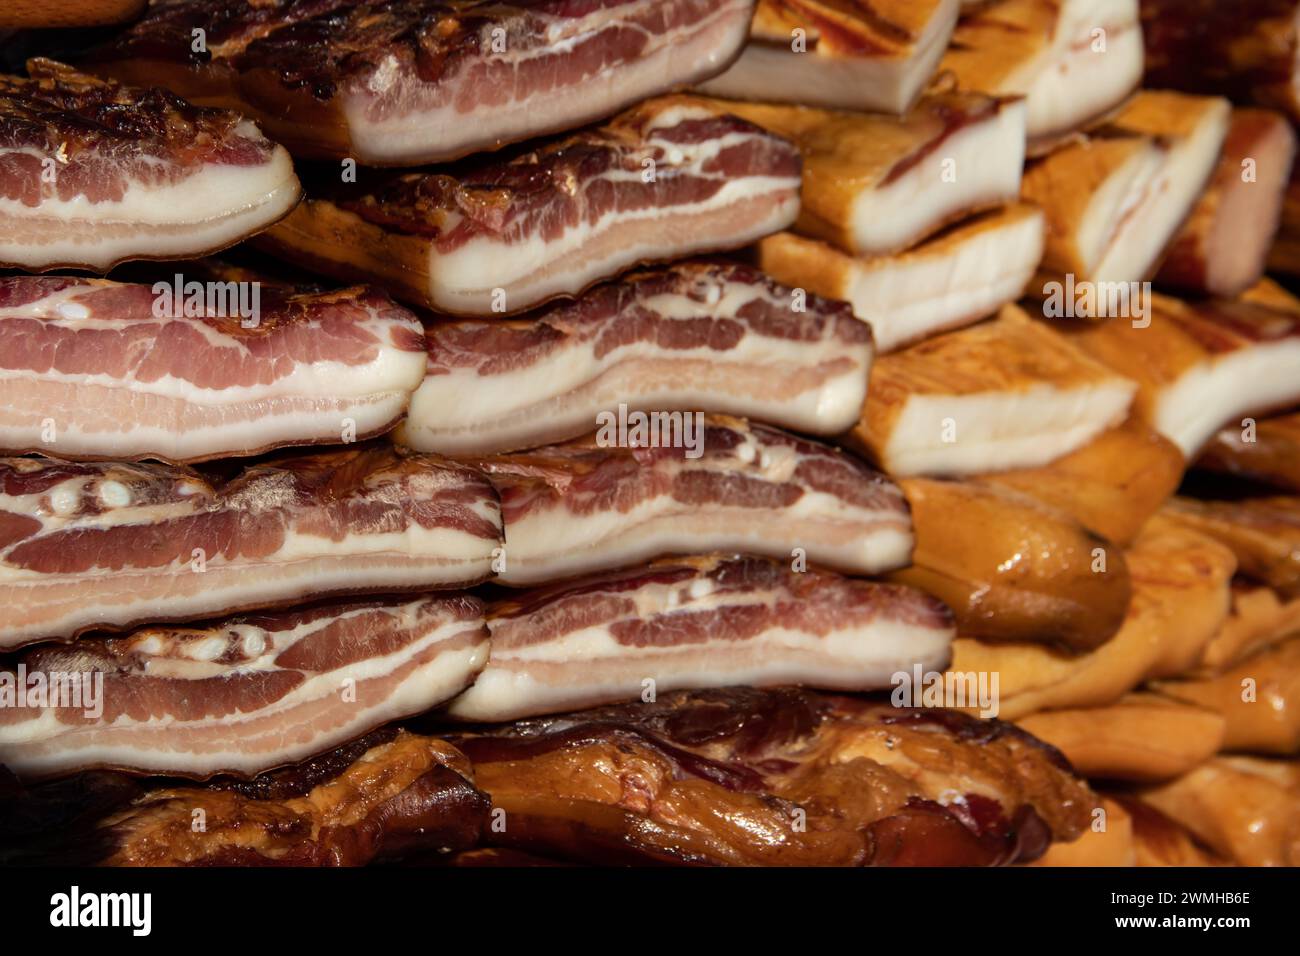 Exposed bacon and dried meat domestic products presented for sale on a farmer's market in Kacarevo village, gastro bacon and dry meat products Stock Photo